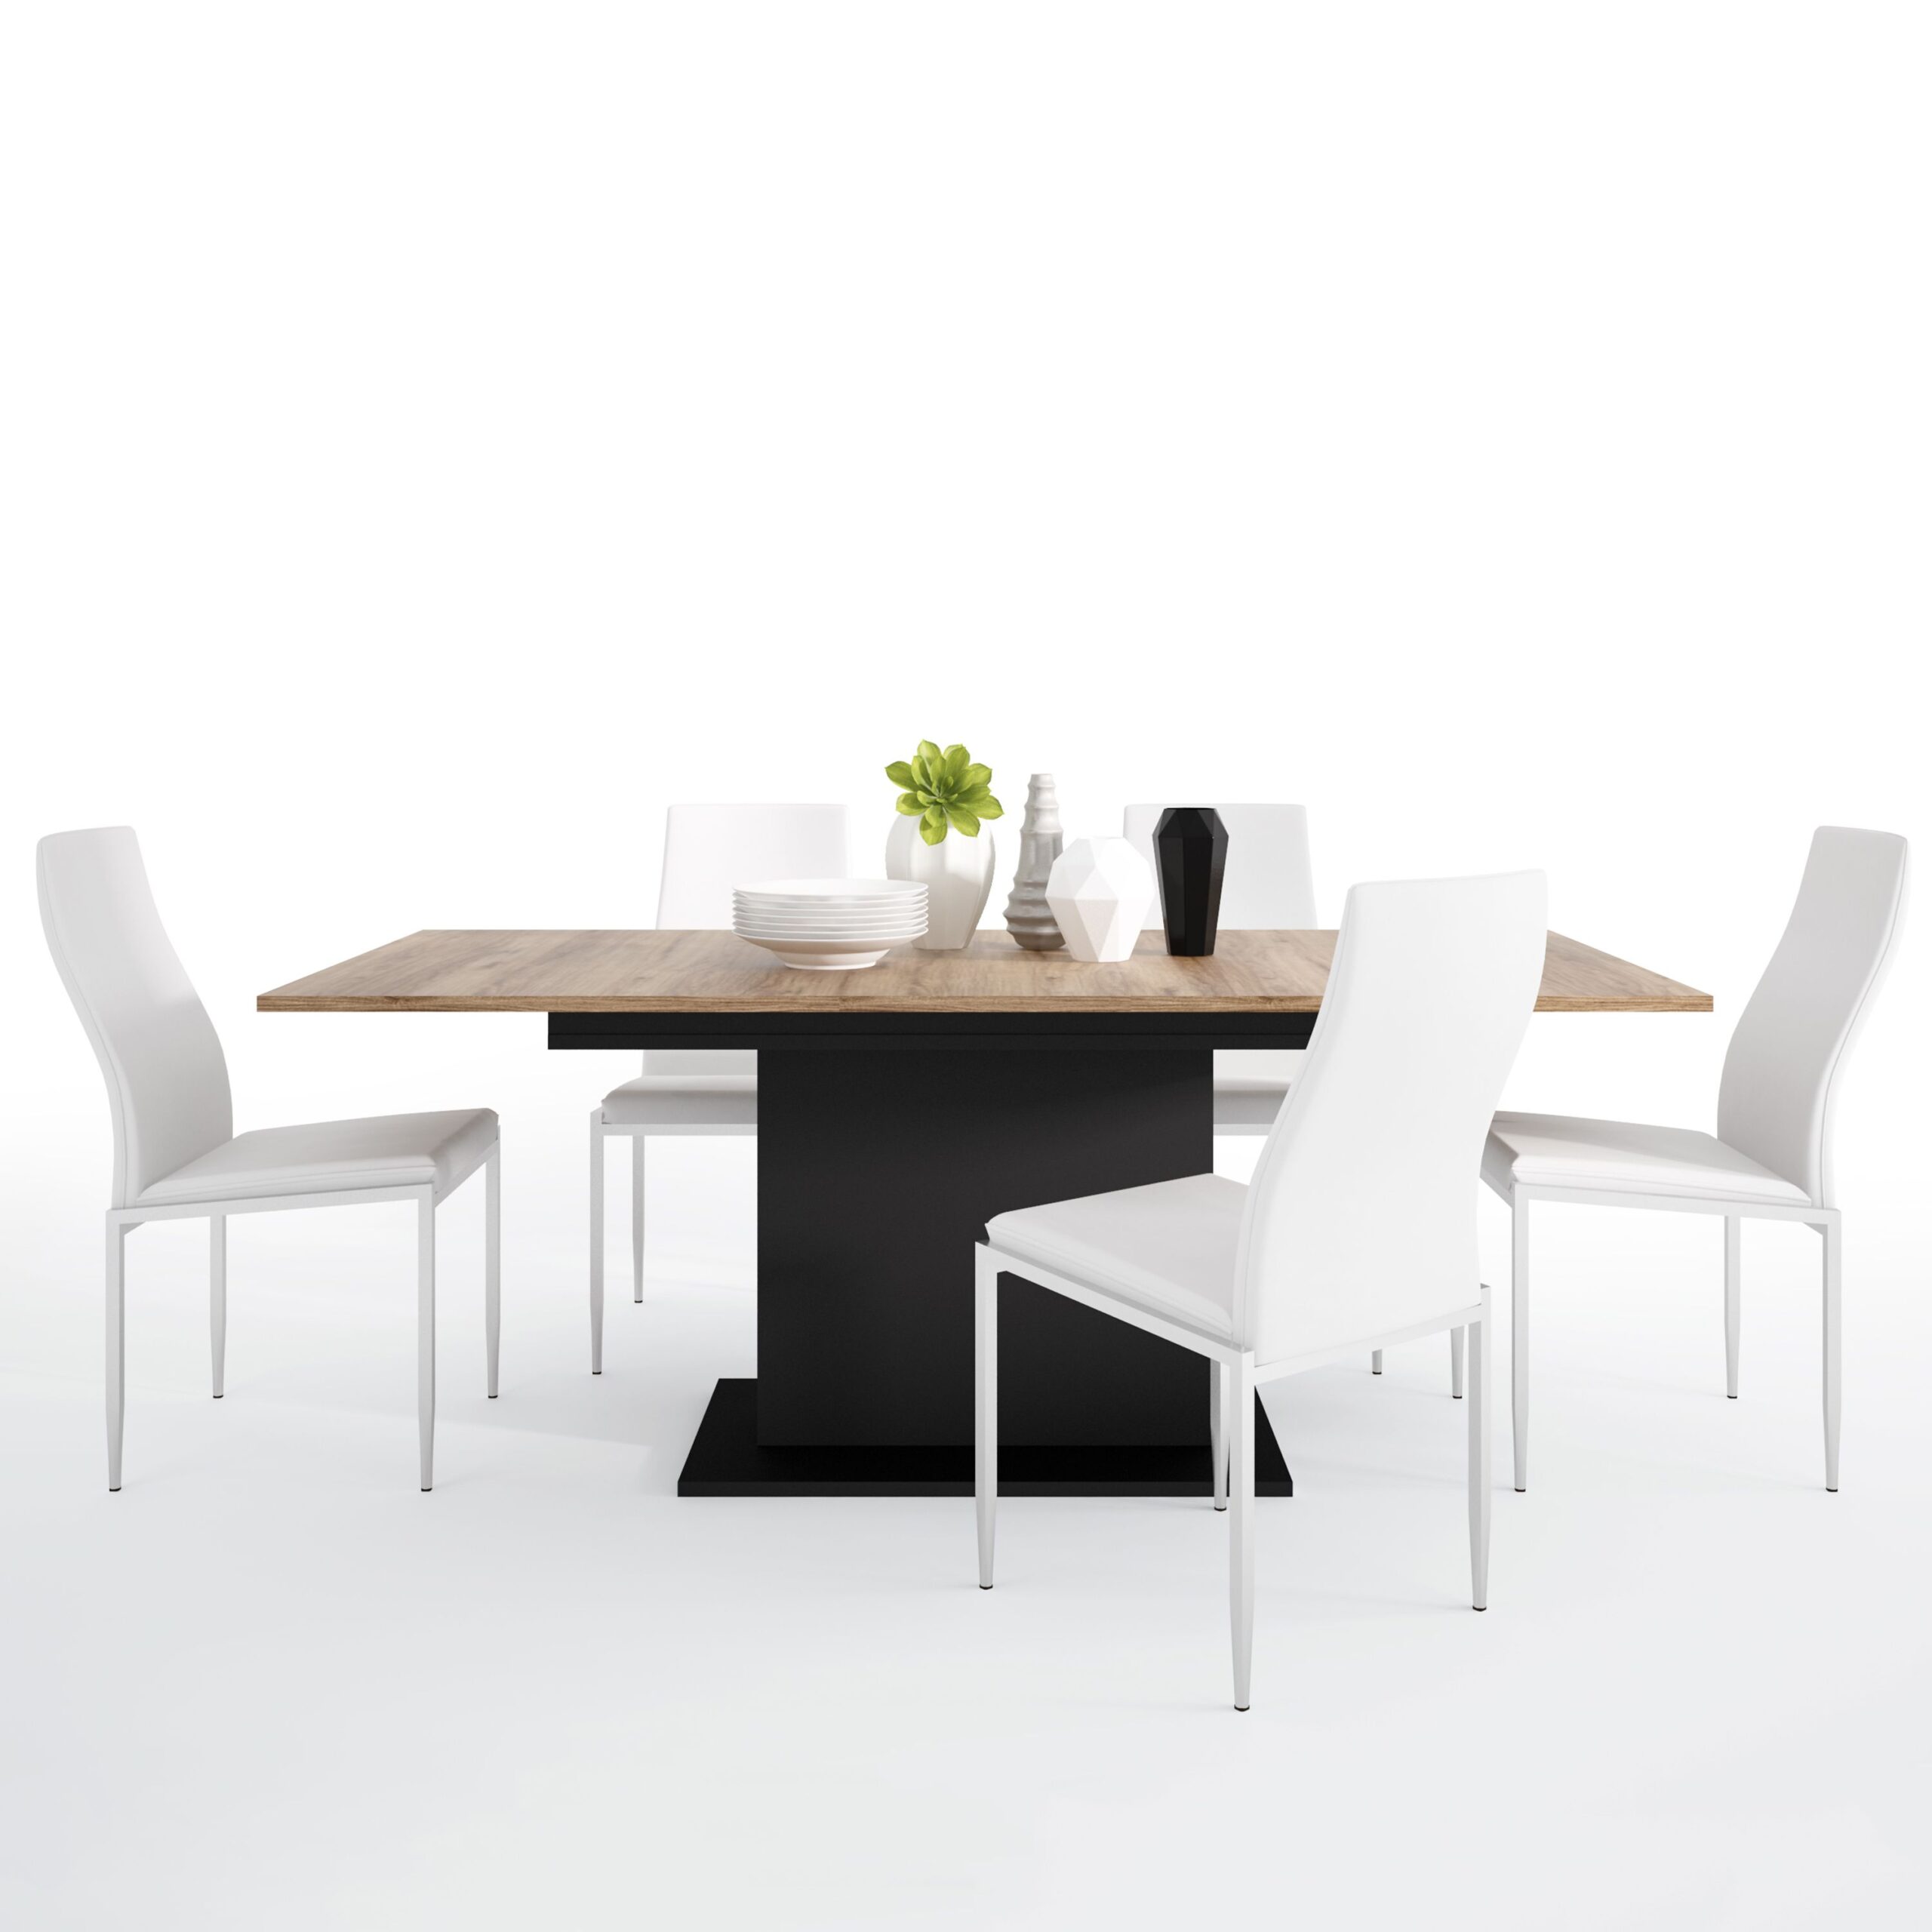 Yolo Set Yolo Extending Table 6 Lillie High Chair White.